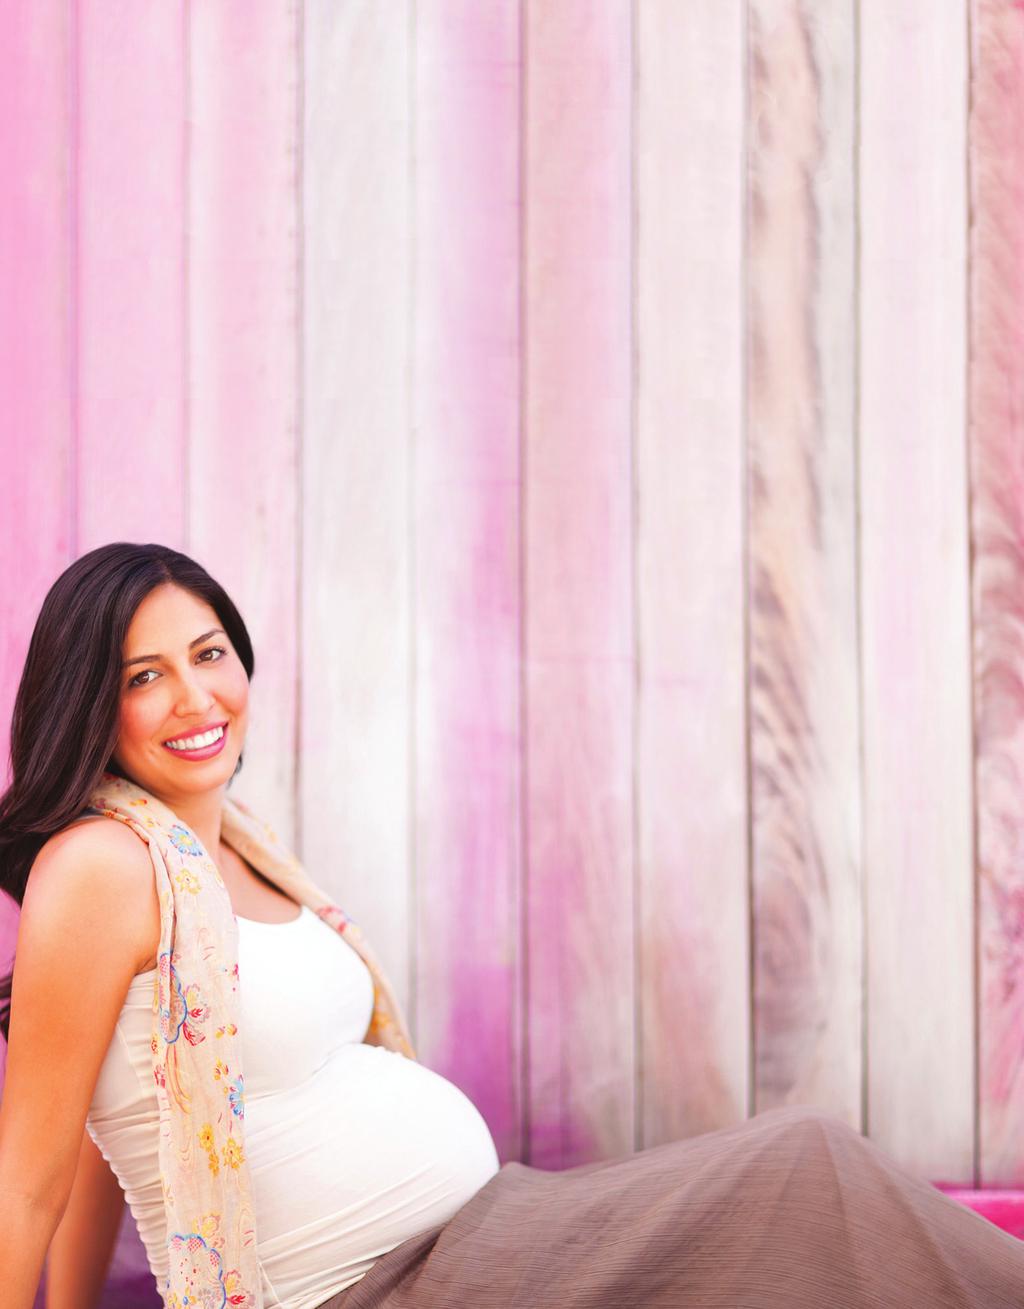 Welcoming your baby The Women s Center A home away from home for moms-to-be Moms and dads want to be surrounded by dedicated healthcare providers in a warm,